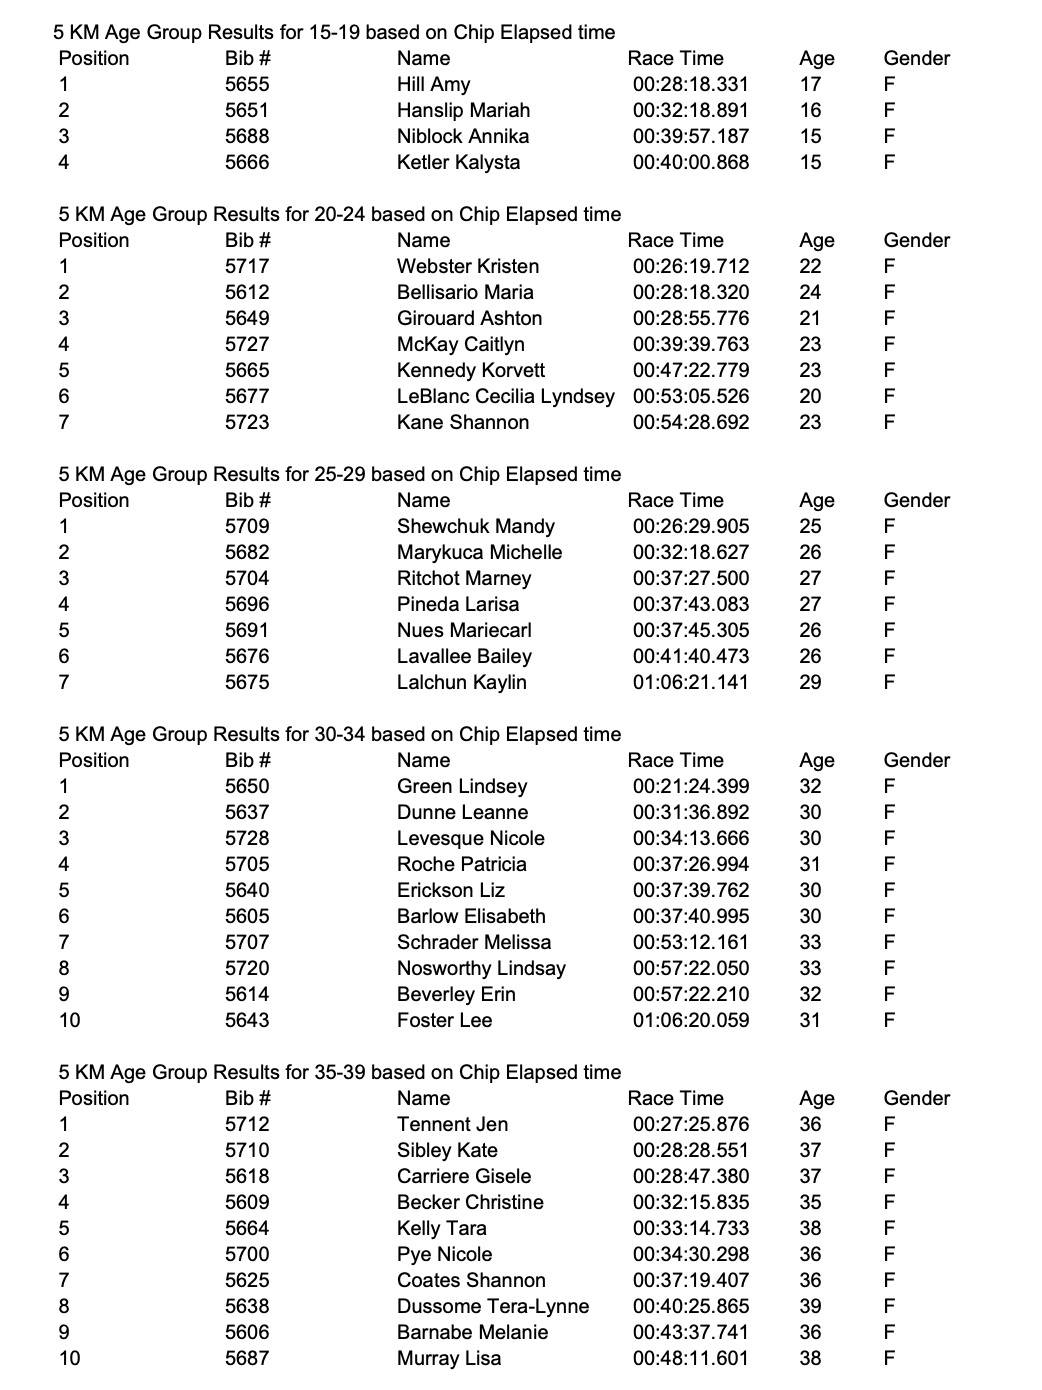 2017 5 K Age Group Results